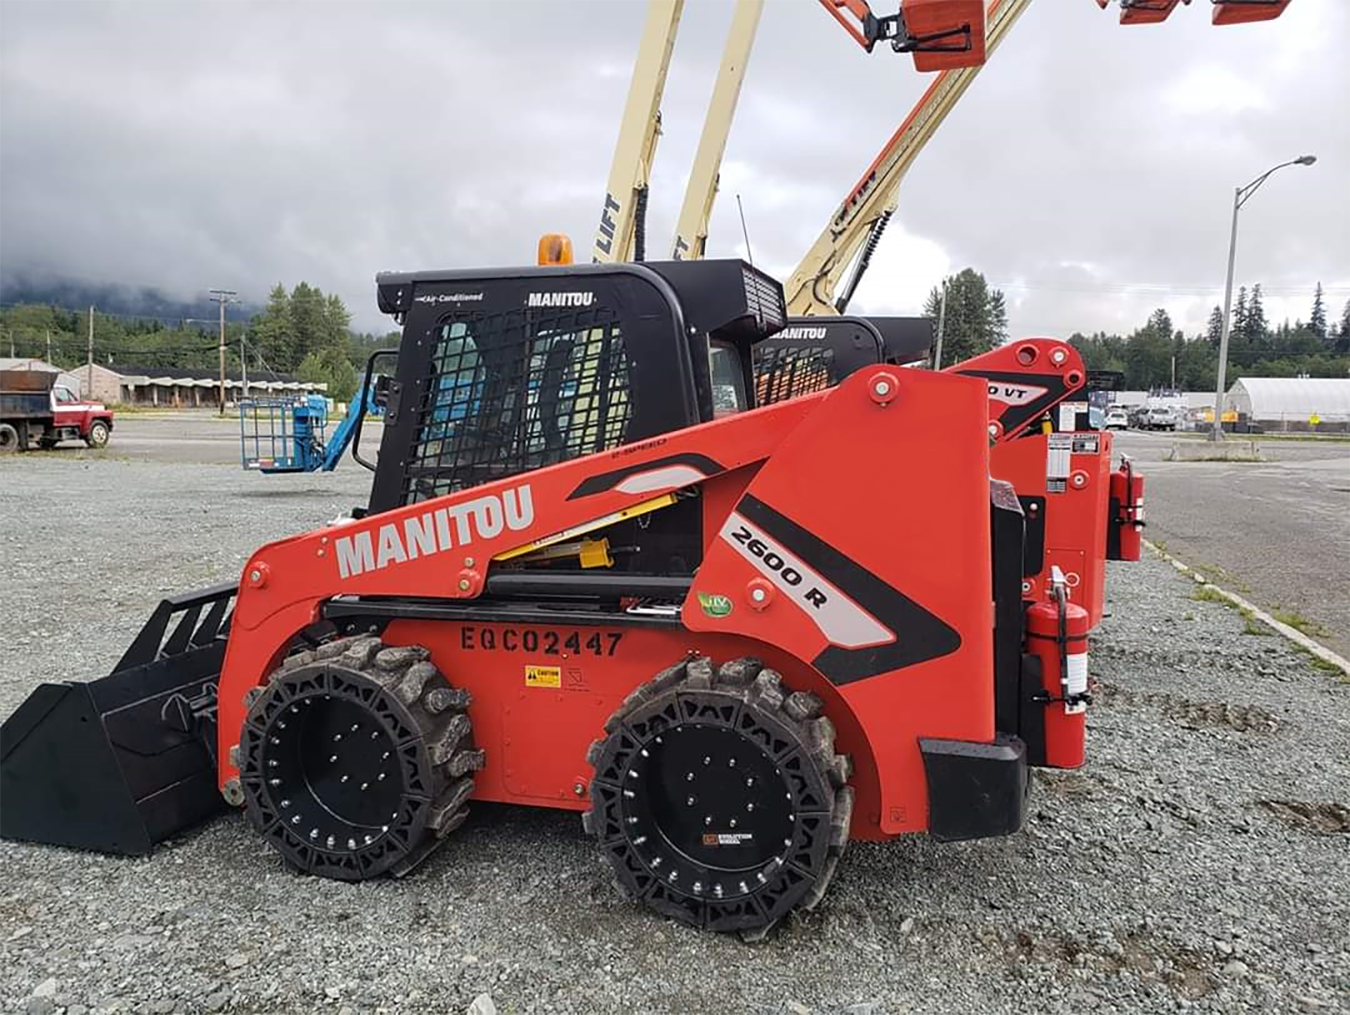 In the image below, we see a Red Manitou skid steer that uses Bobcat solid tires.